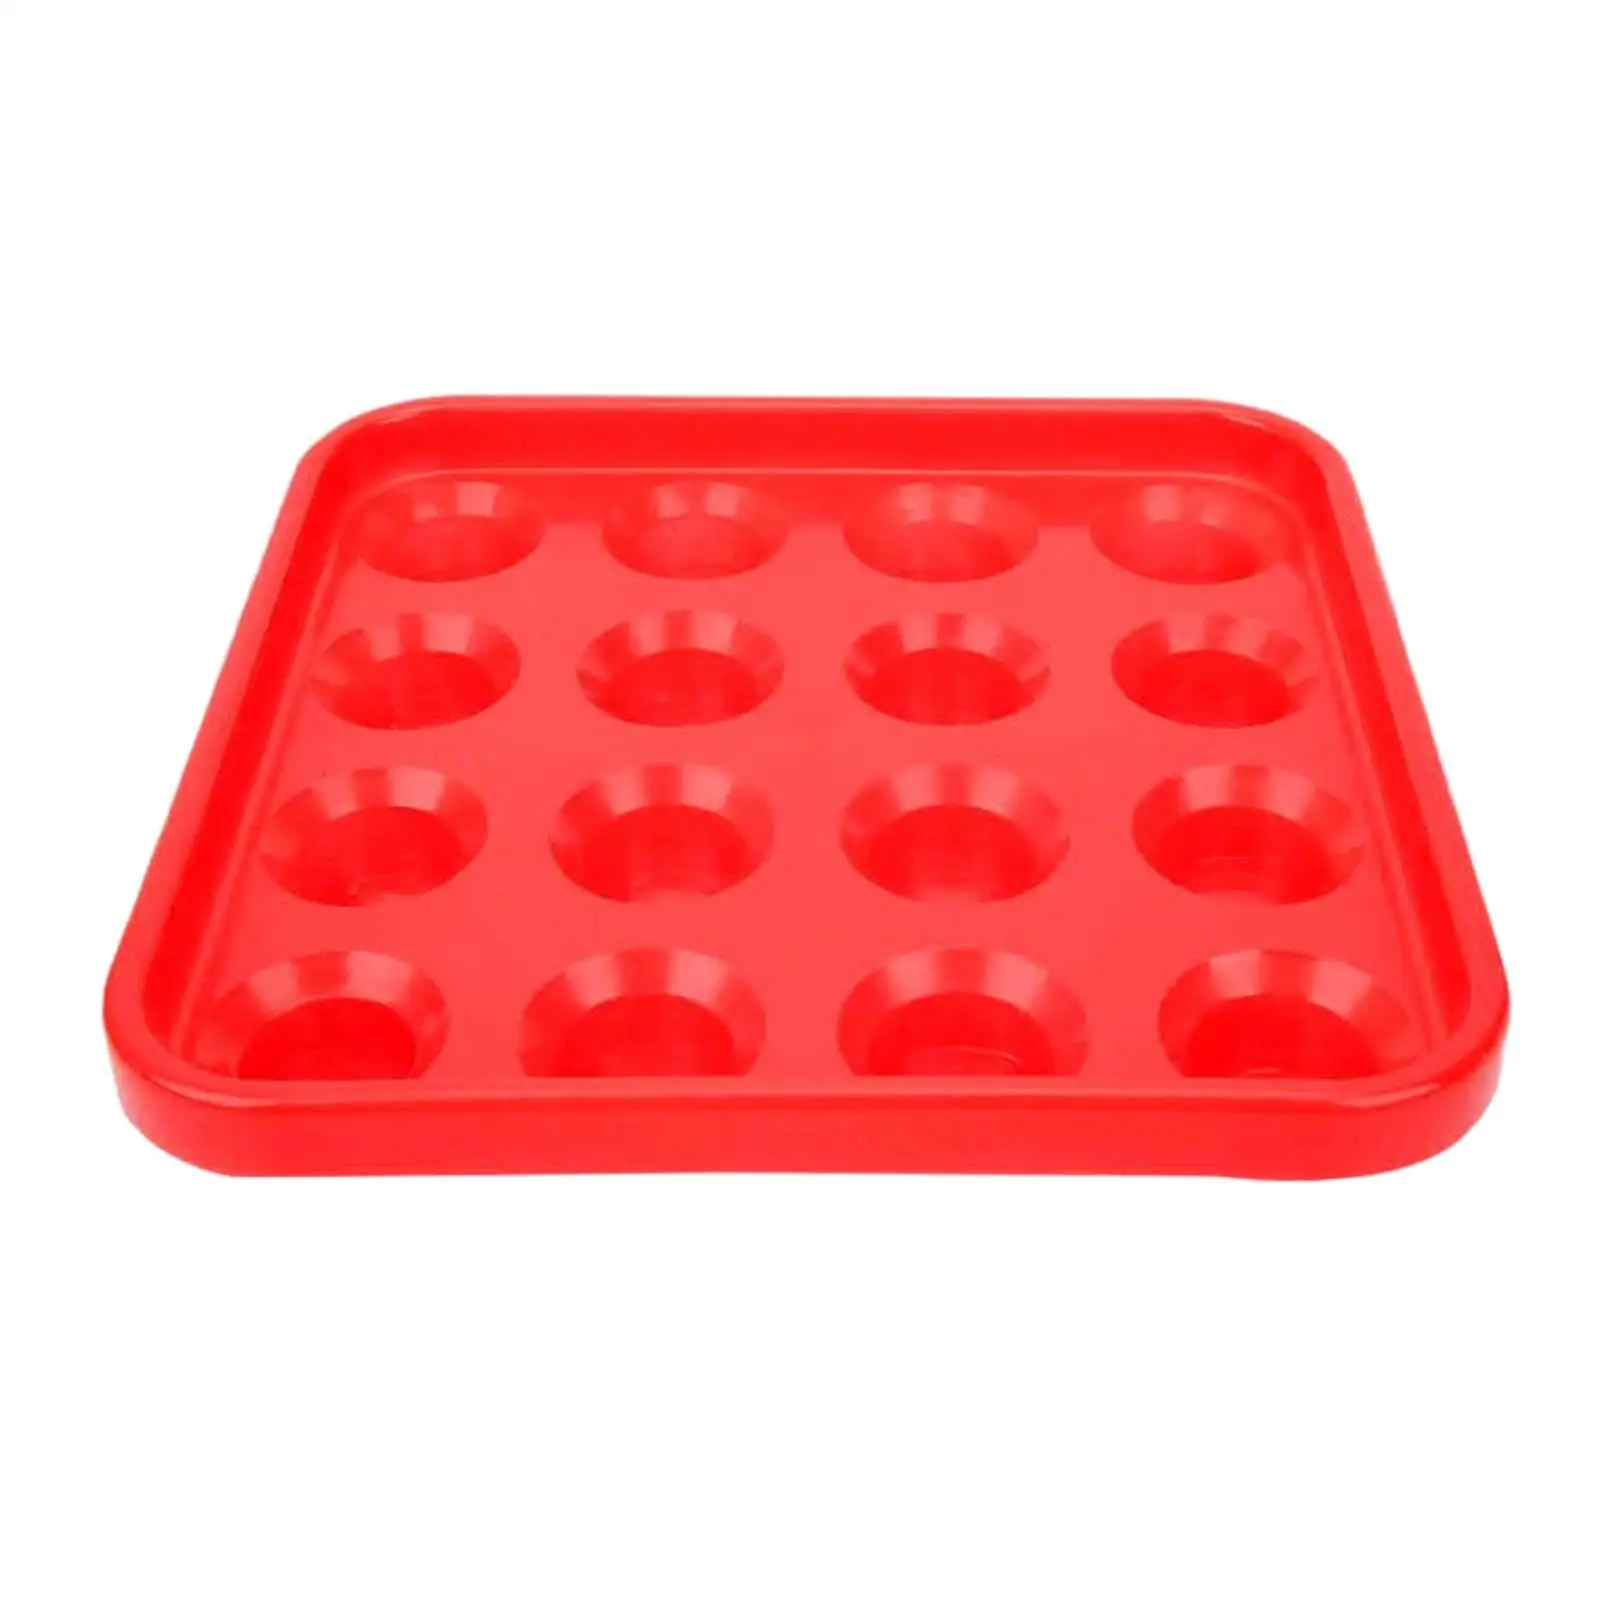 Billiard Ball Holder Tray Pool Accessory, 16 Holes Case, Snooker Pool Halls Game Room Portable Anti Drop Pool Ball Tray